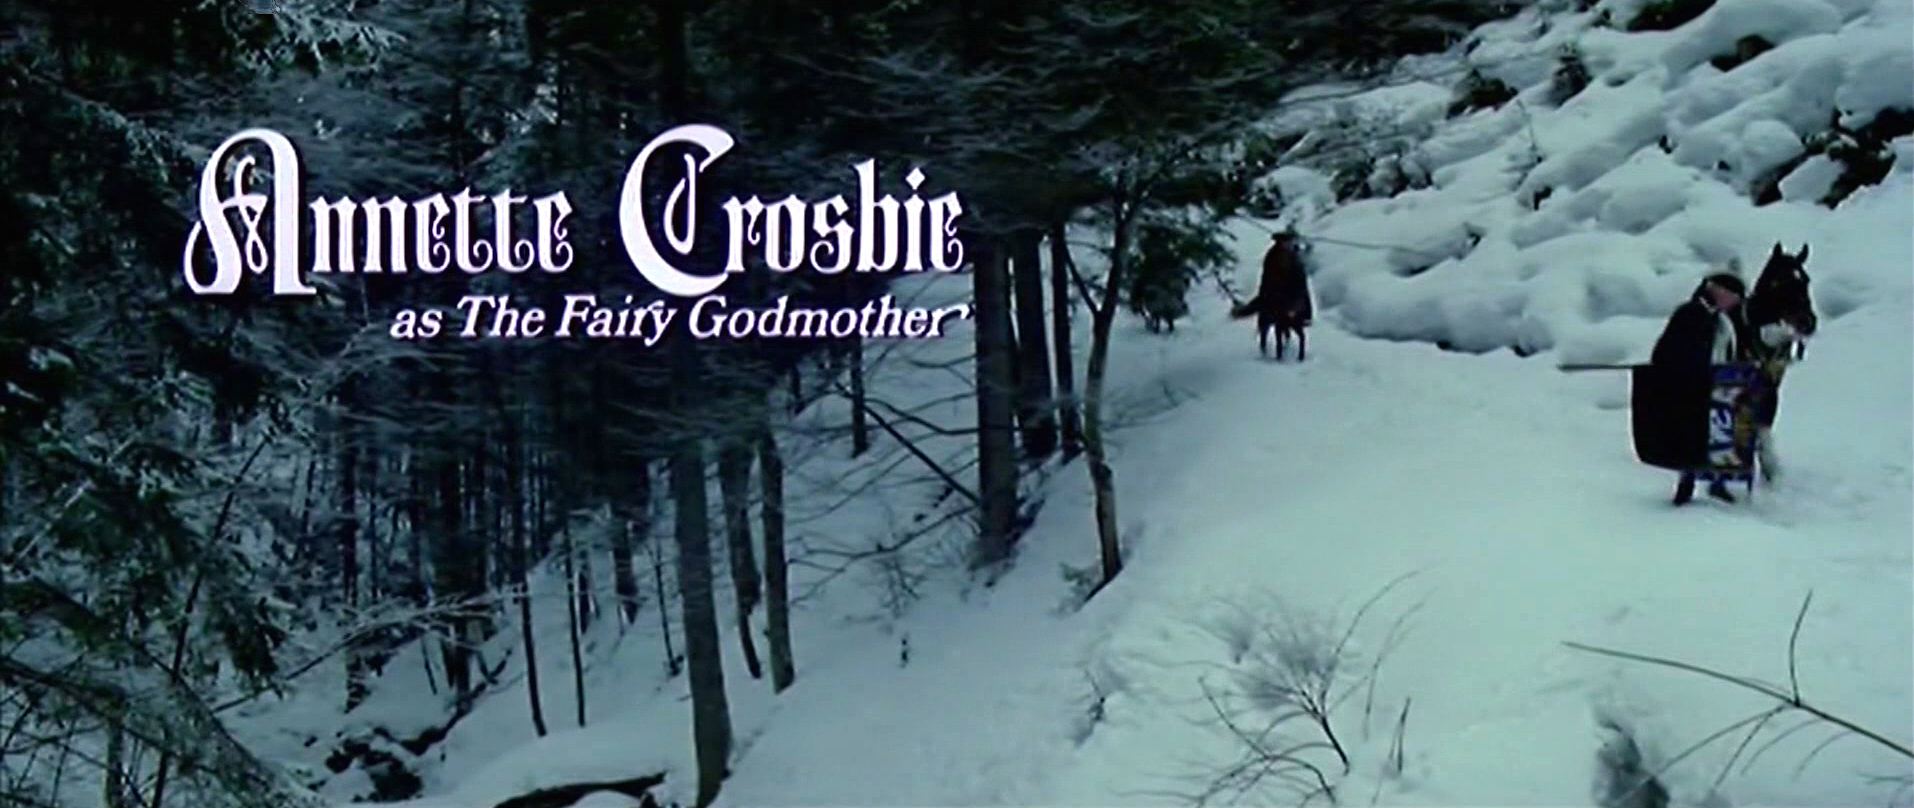 Main title from The Slipper and the Rose (1976) (6). Annette Crosbie as The Fairy Godmother